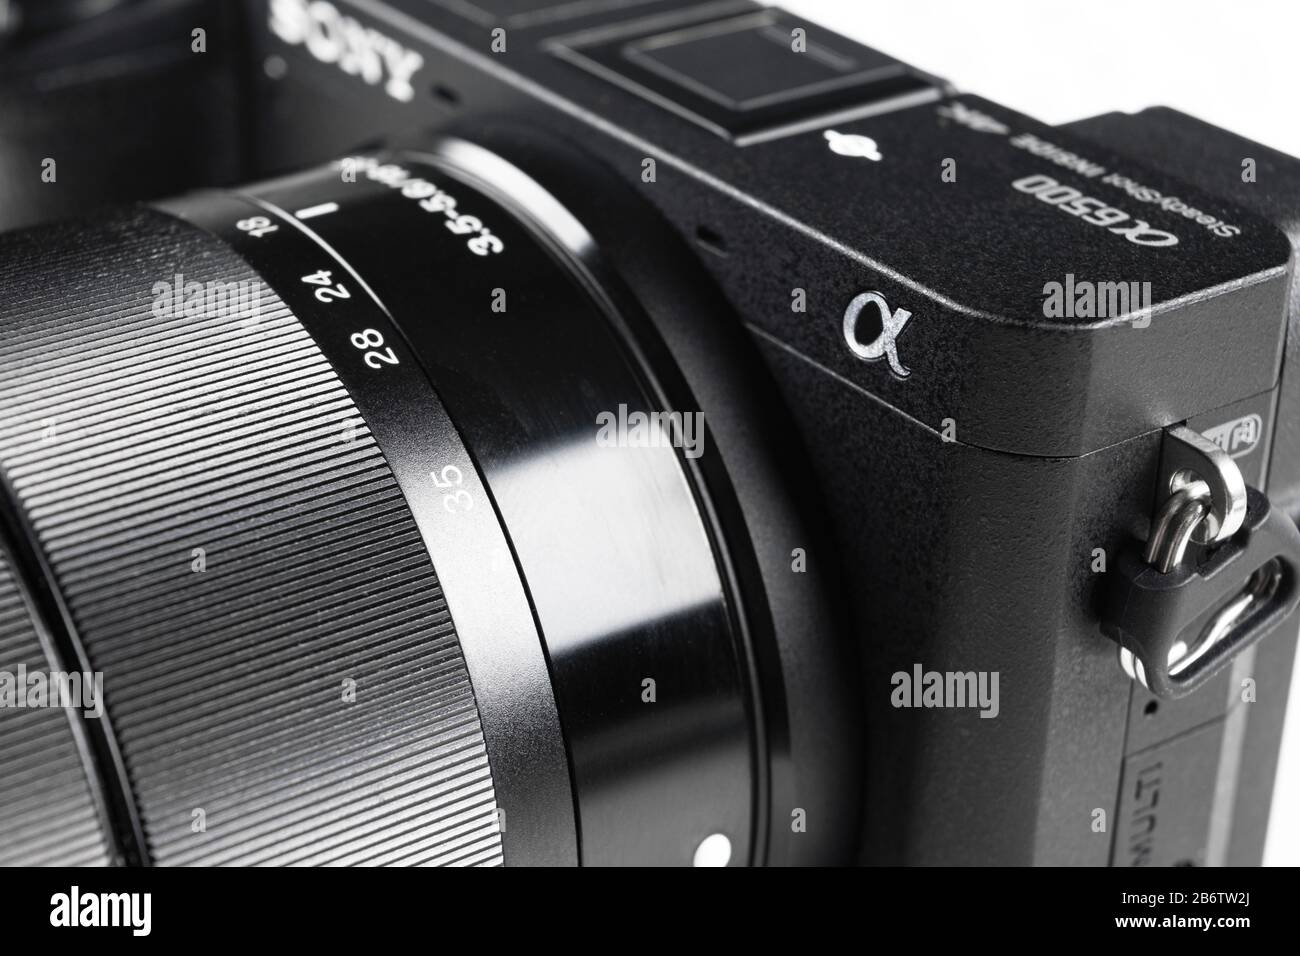 802 Sony A7iii Images, Stock Photos, 3D objects, & Vectors